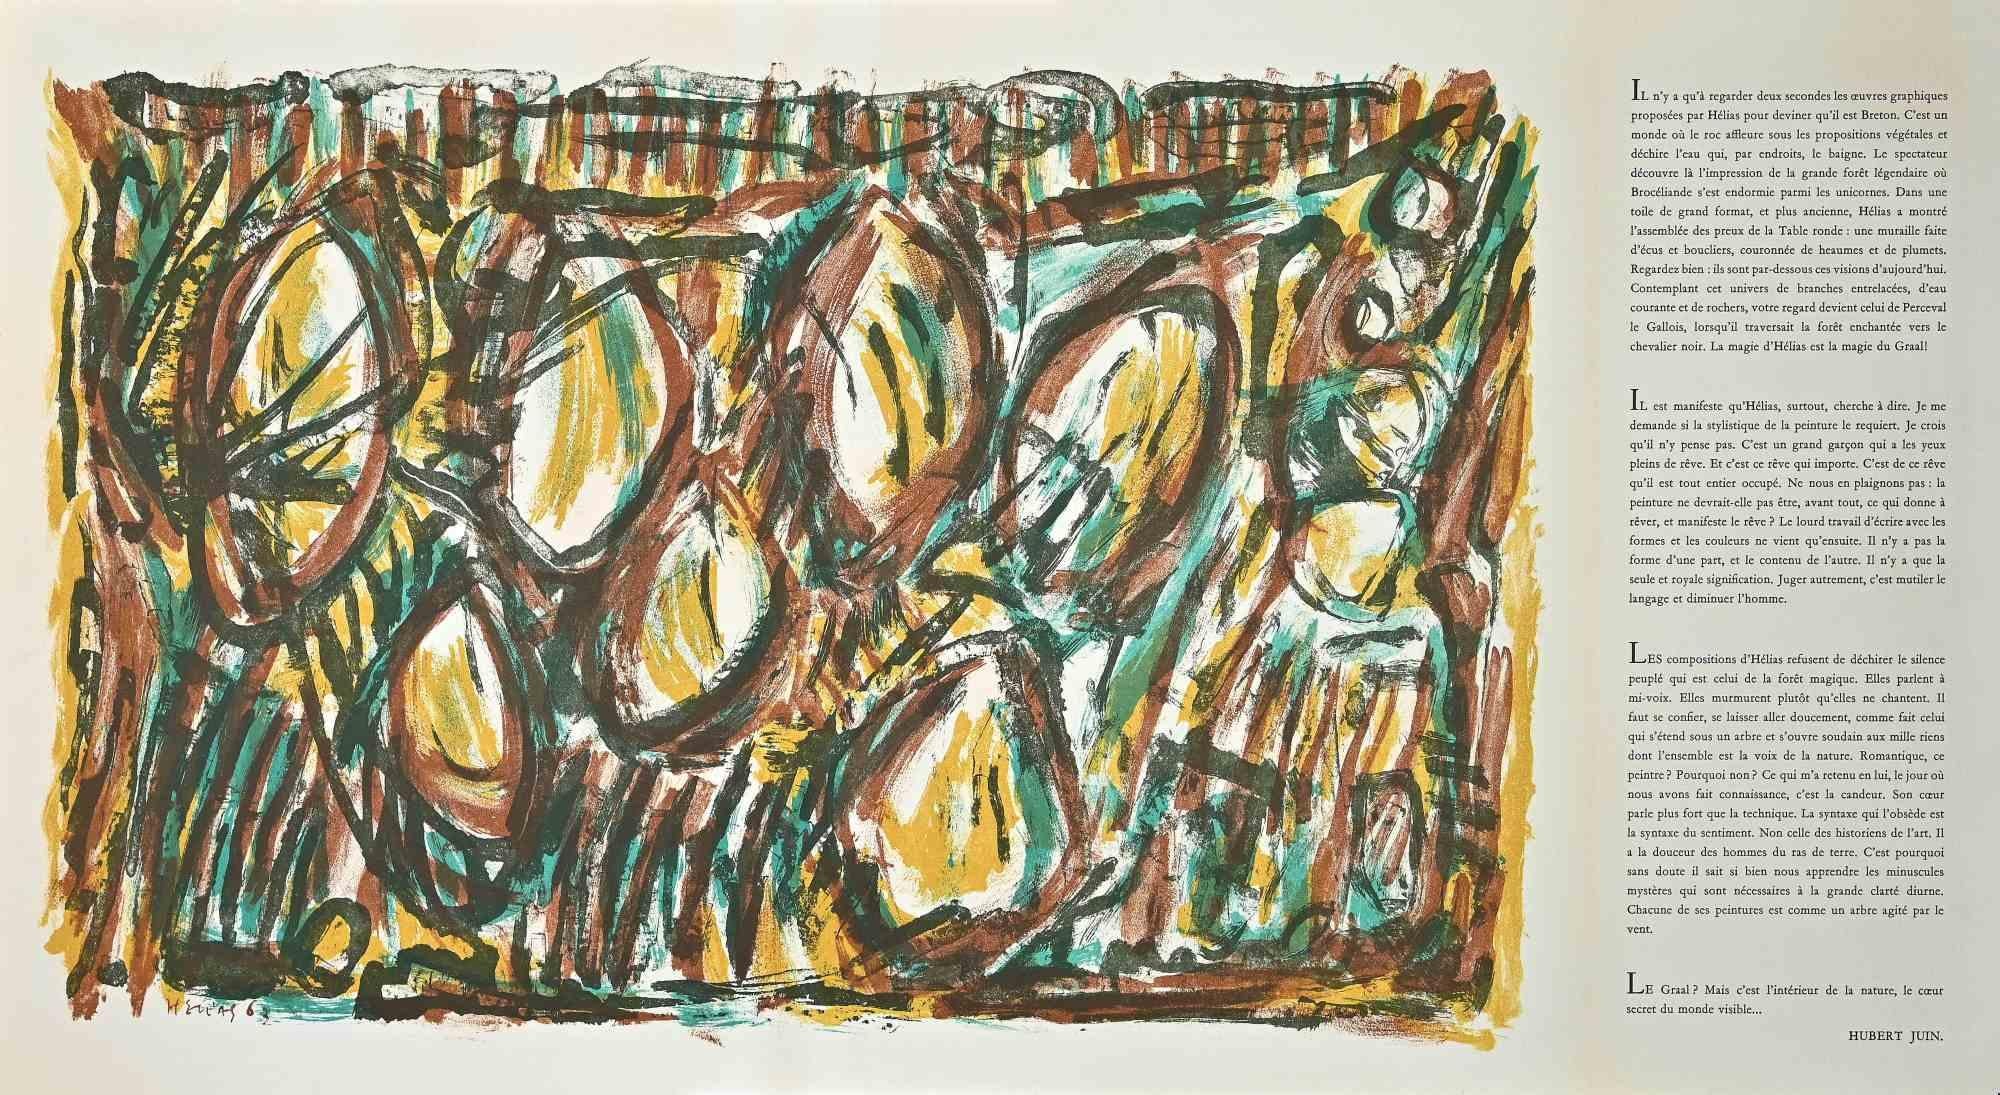 Abstract composition is an original Lithograph realized by Serge Hélias in 1962.

Signed on plate lower left.

On the same sheet: an Essay by Hubert Juin.